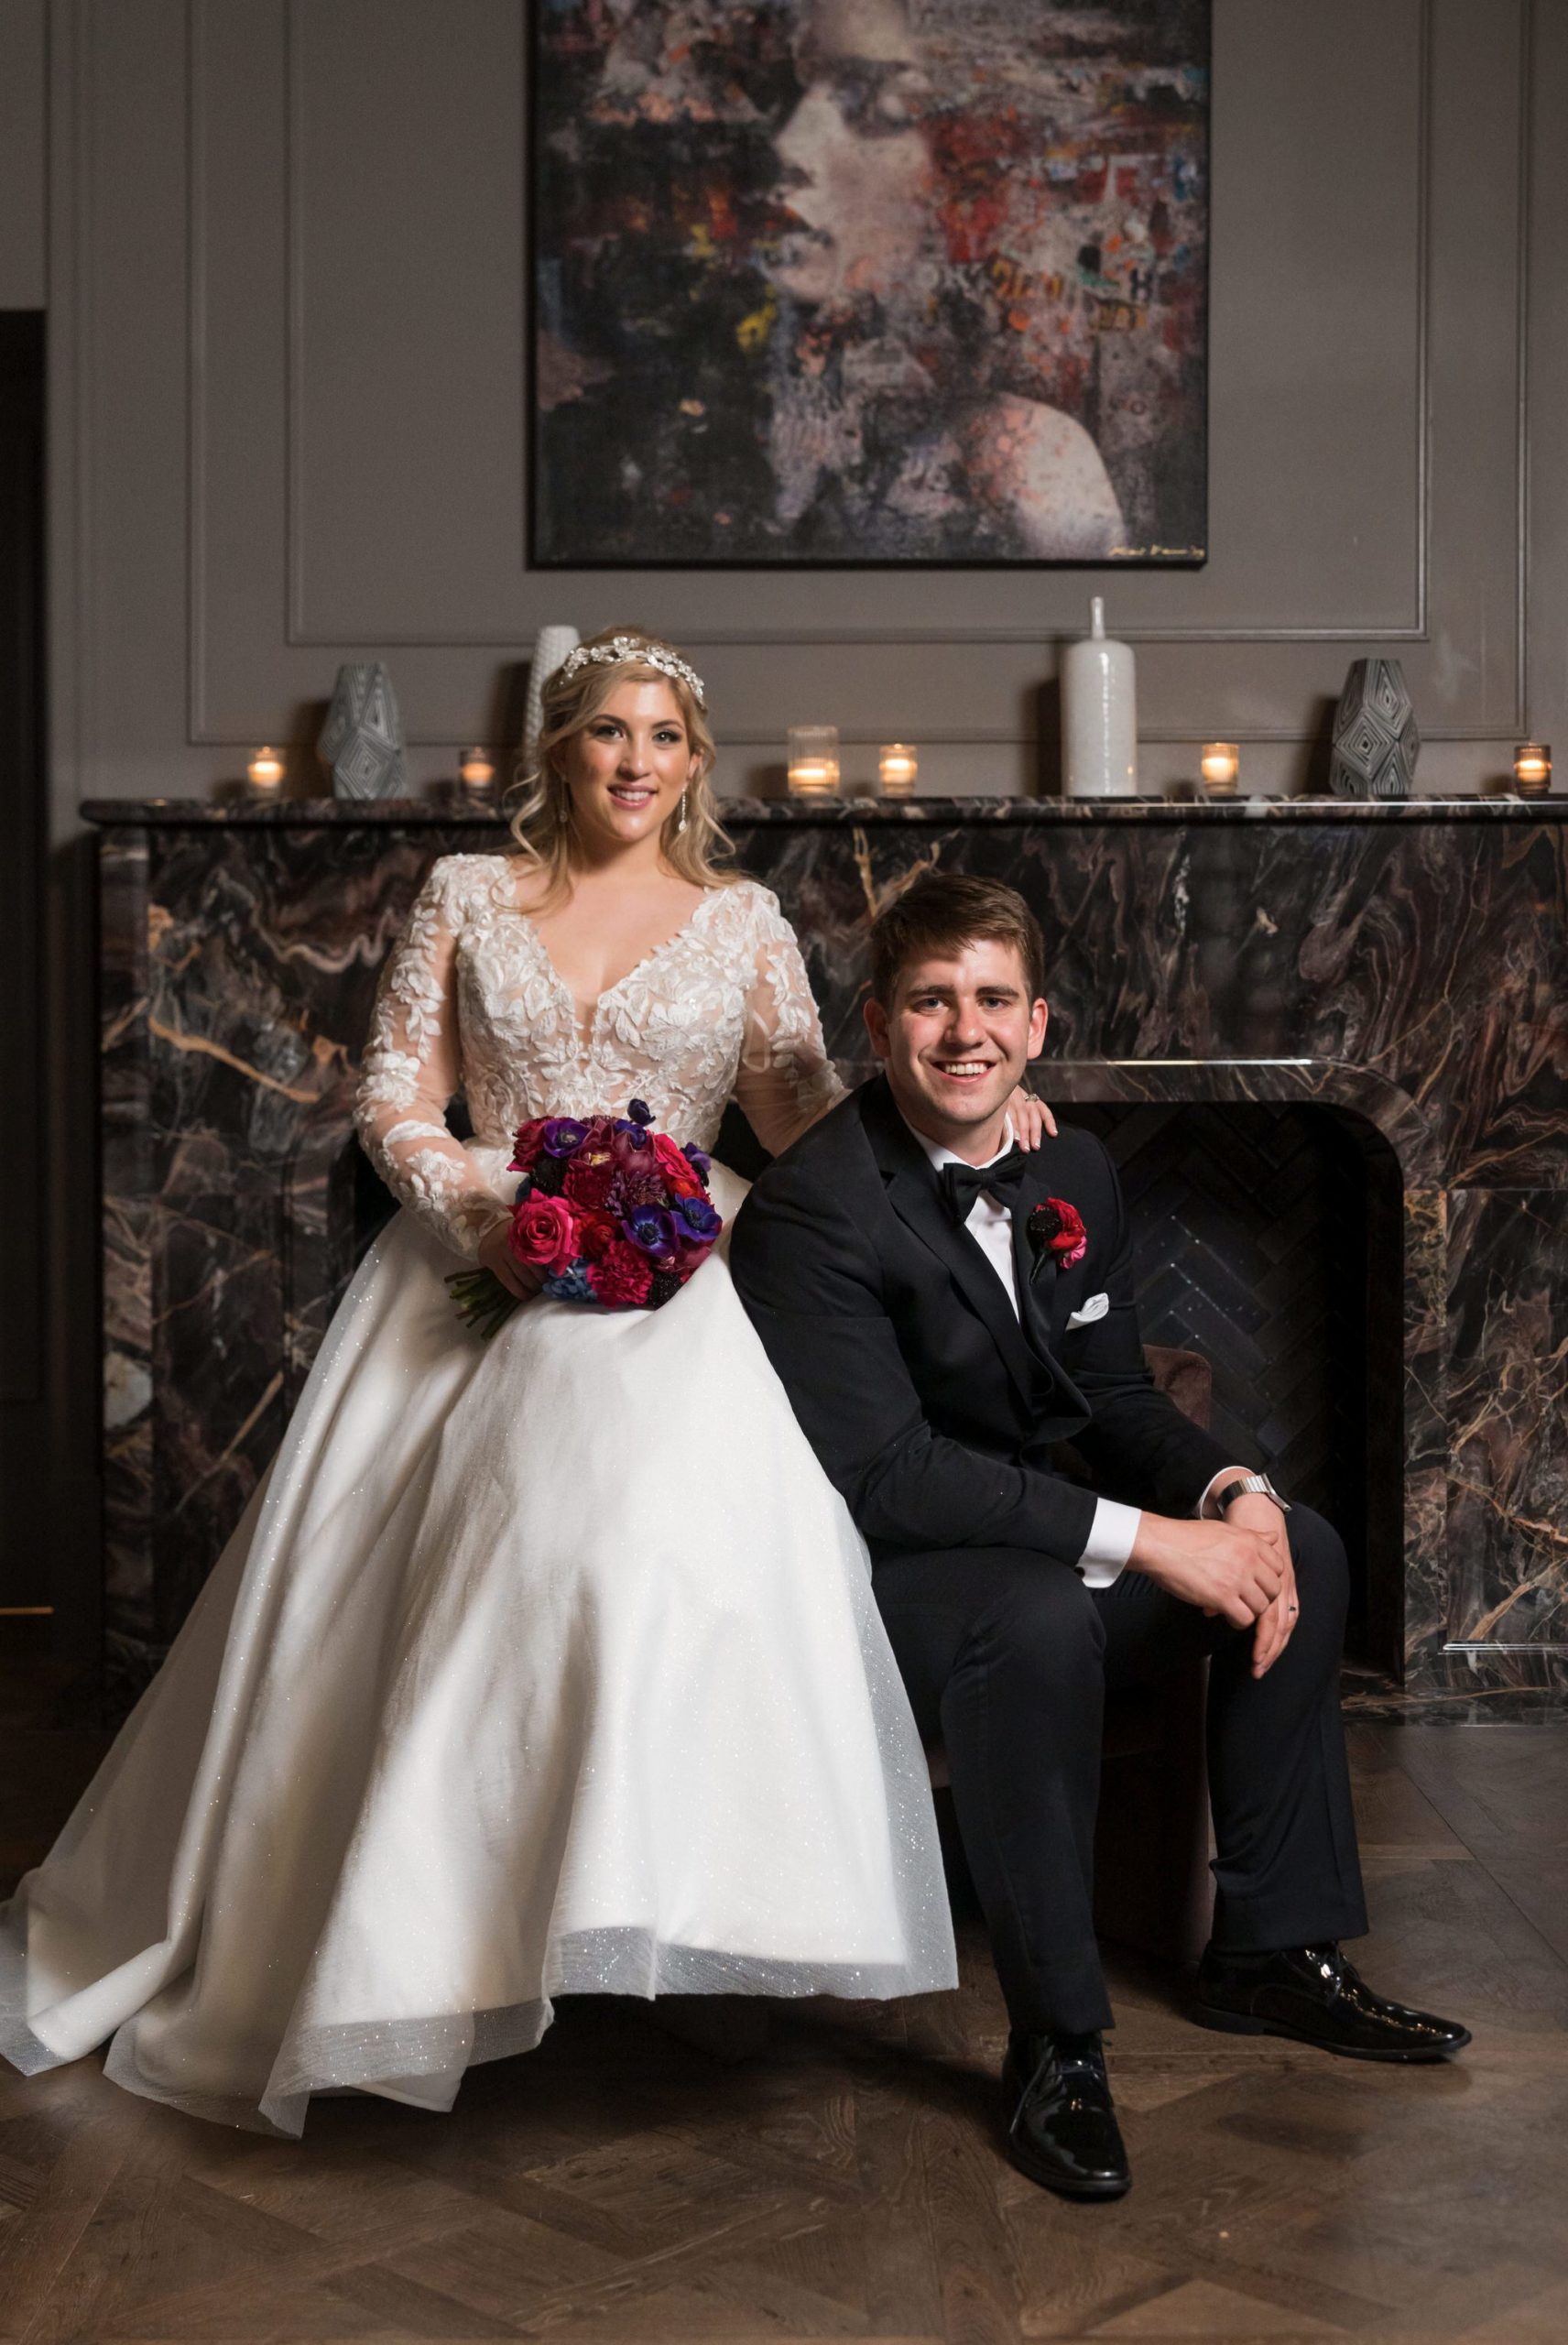 A bride and groom pose in formal fashion at their Daxton Hotel wedding.  